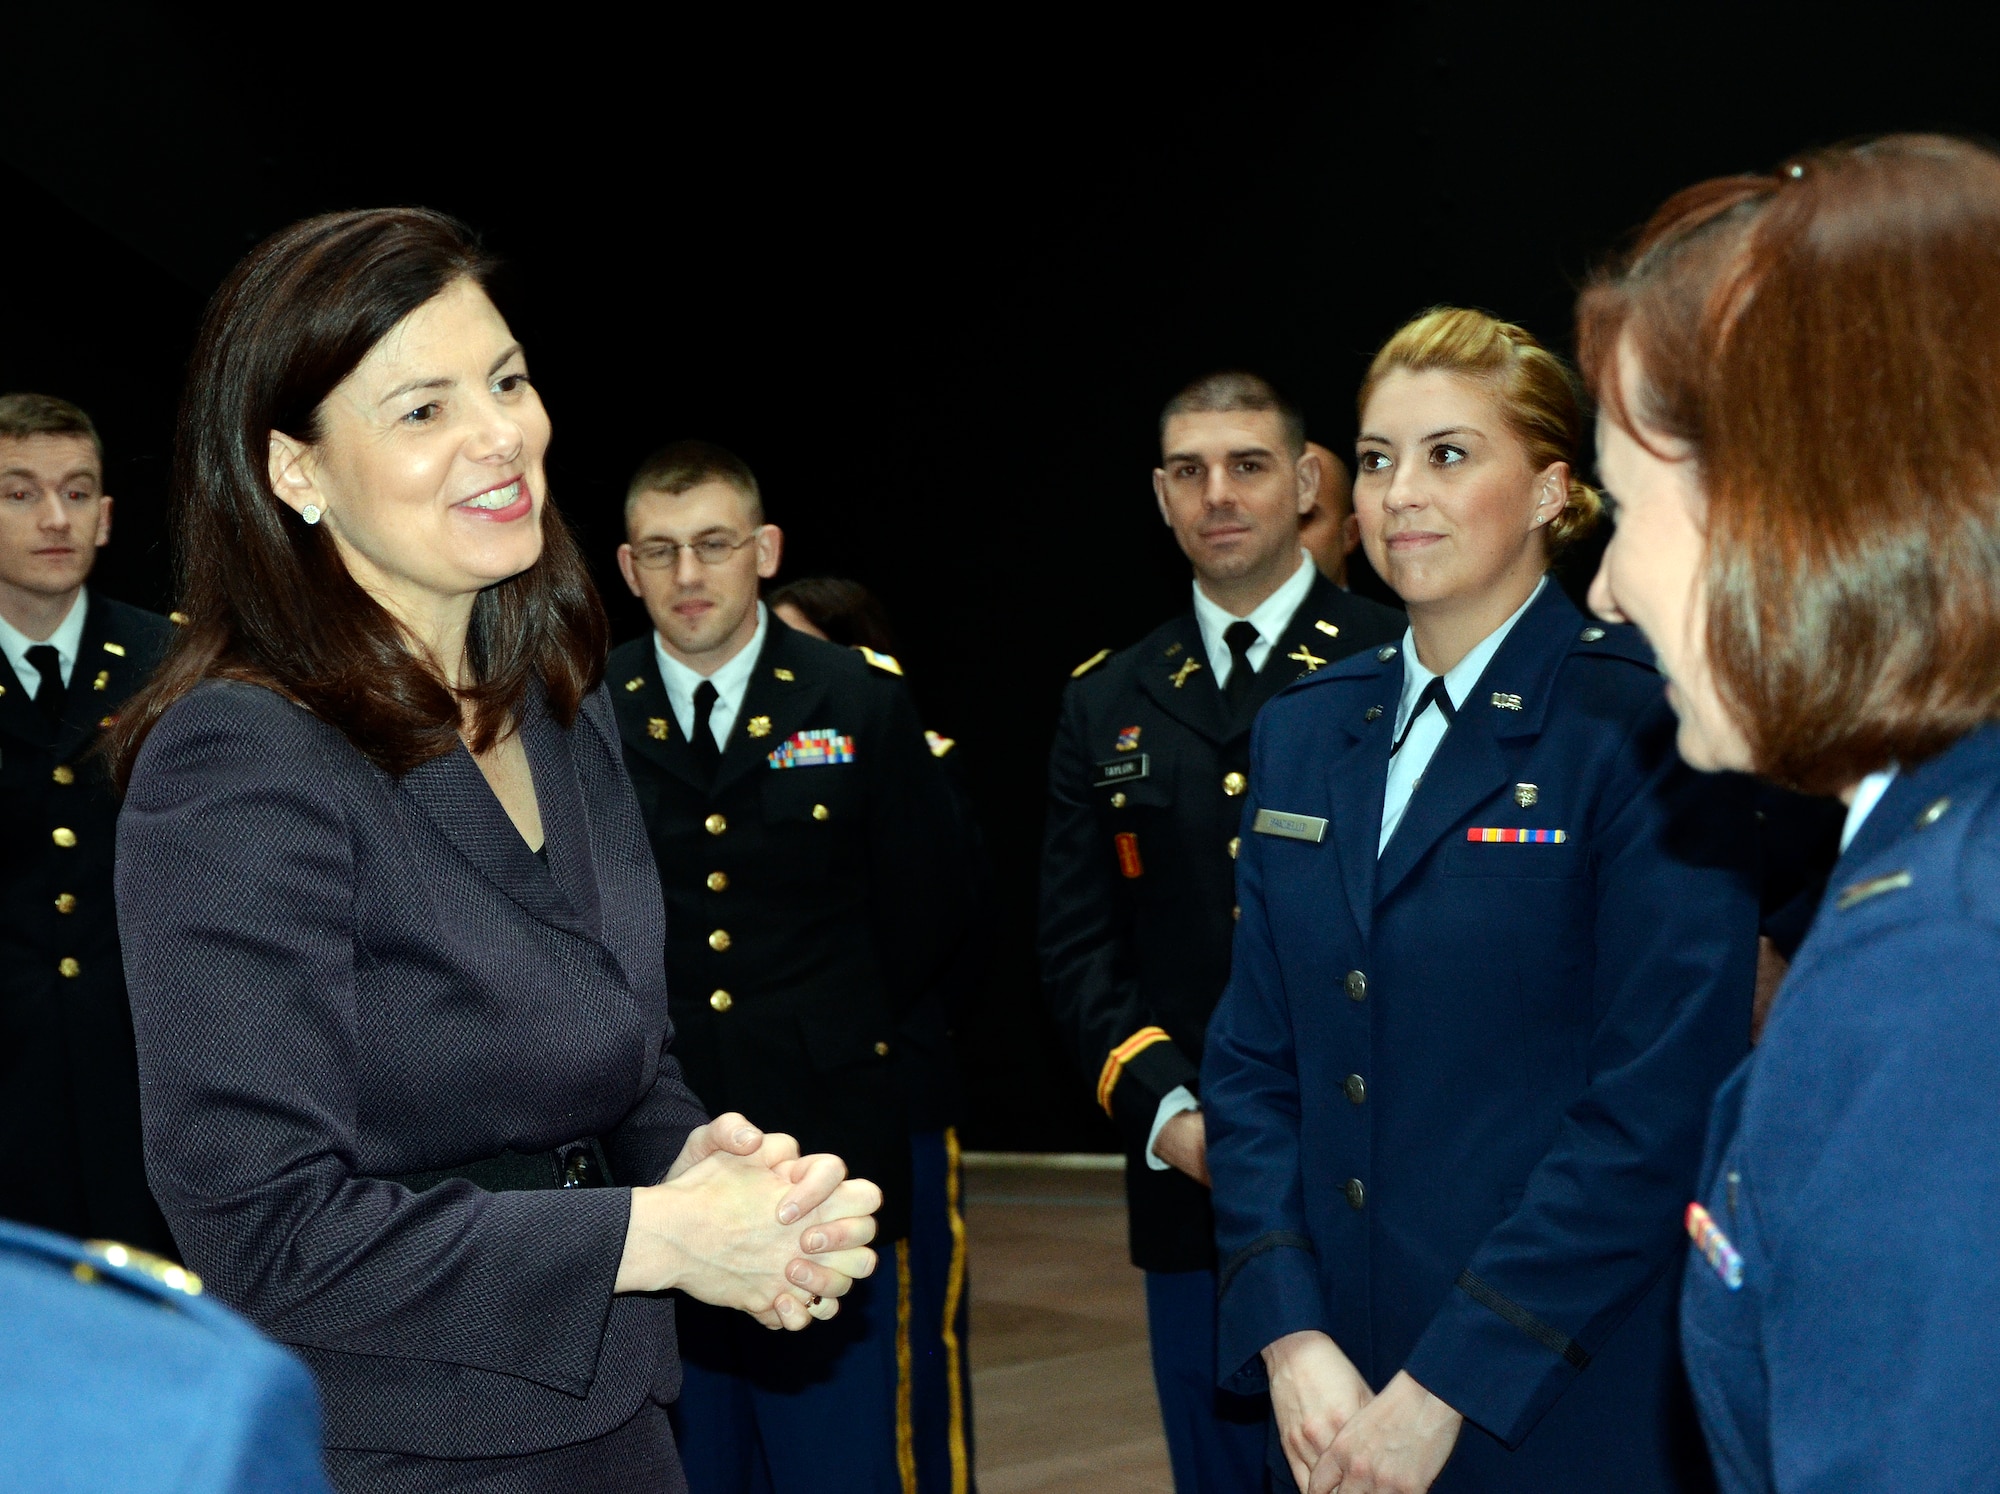 WASHINGTON -- U.S. Senator Kelly Ayotte (left) spoke with Company Grade Officers with the New Hampshire National Guard on April 30 in the Hart Senate Building in Washington, D.C. The visit was part of a two-day CGO Professional Development Tour. (U.S. Air Force Photo by 2nd Lt. Brooks Payette/Released)